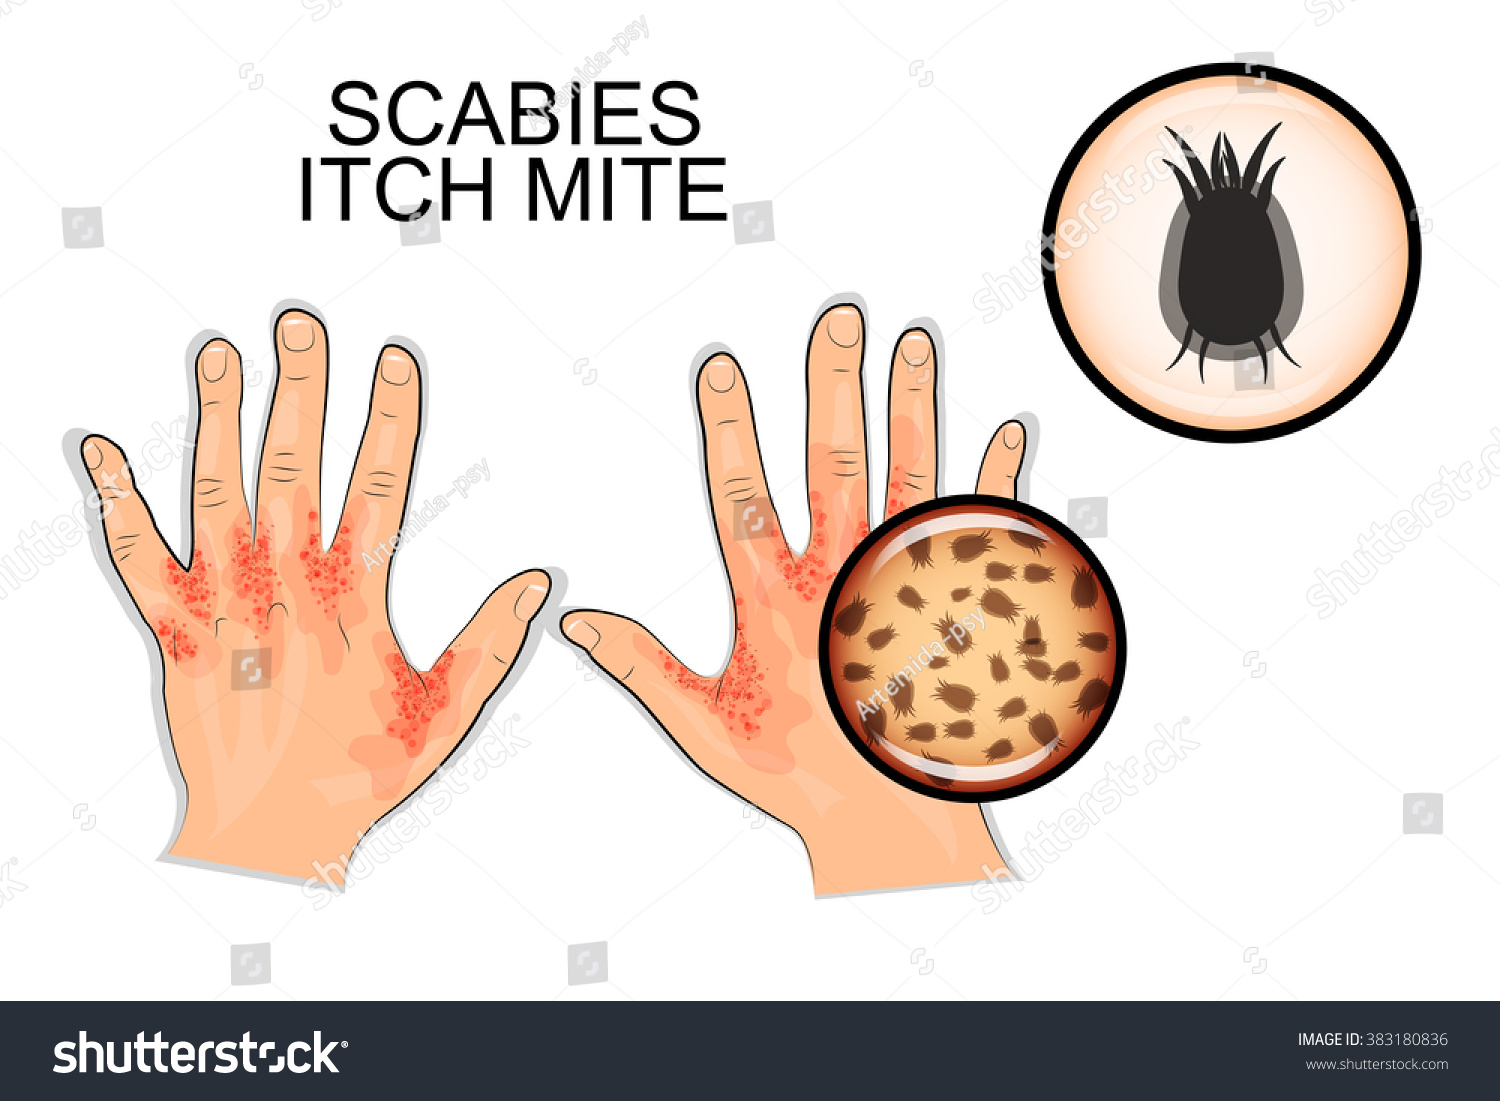 Illustration Hand Infected Scabies Scabies Mite Stock Vector